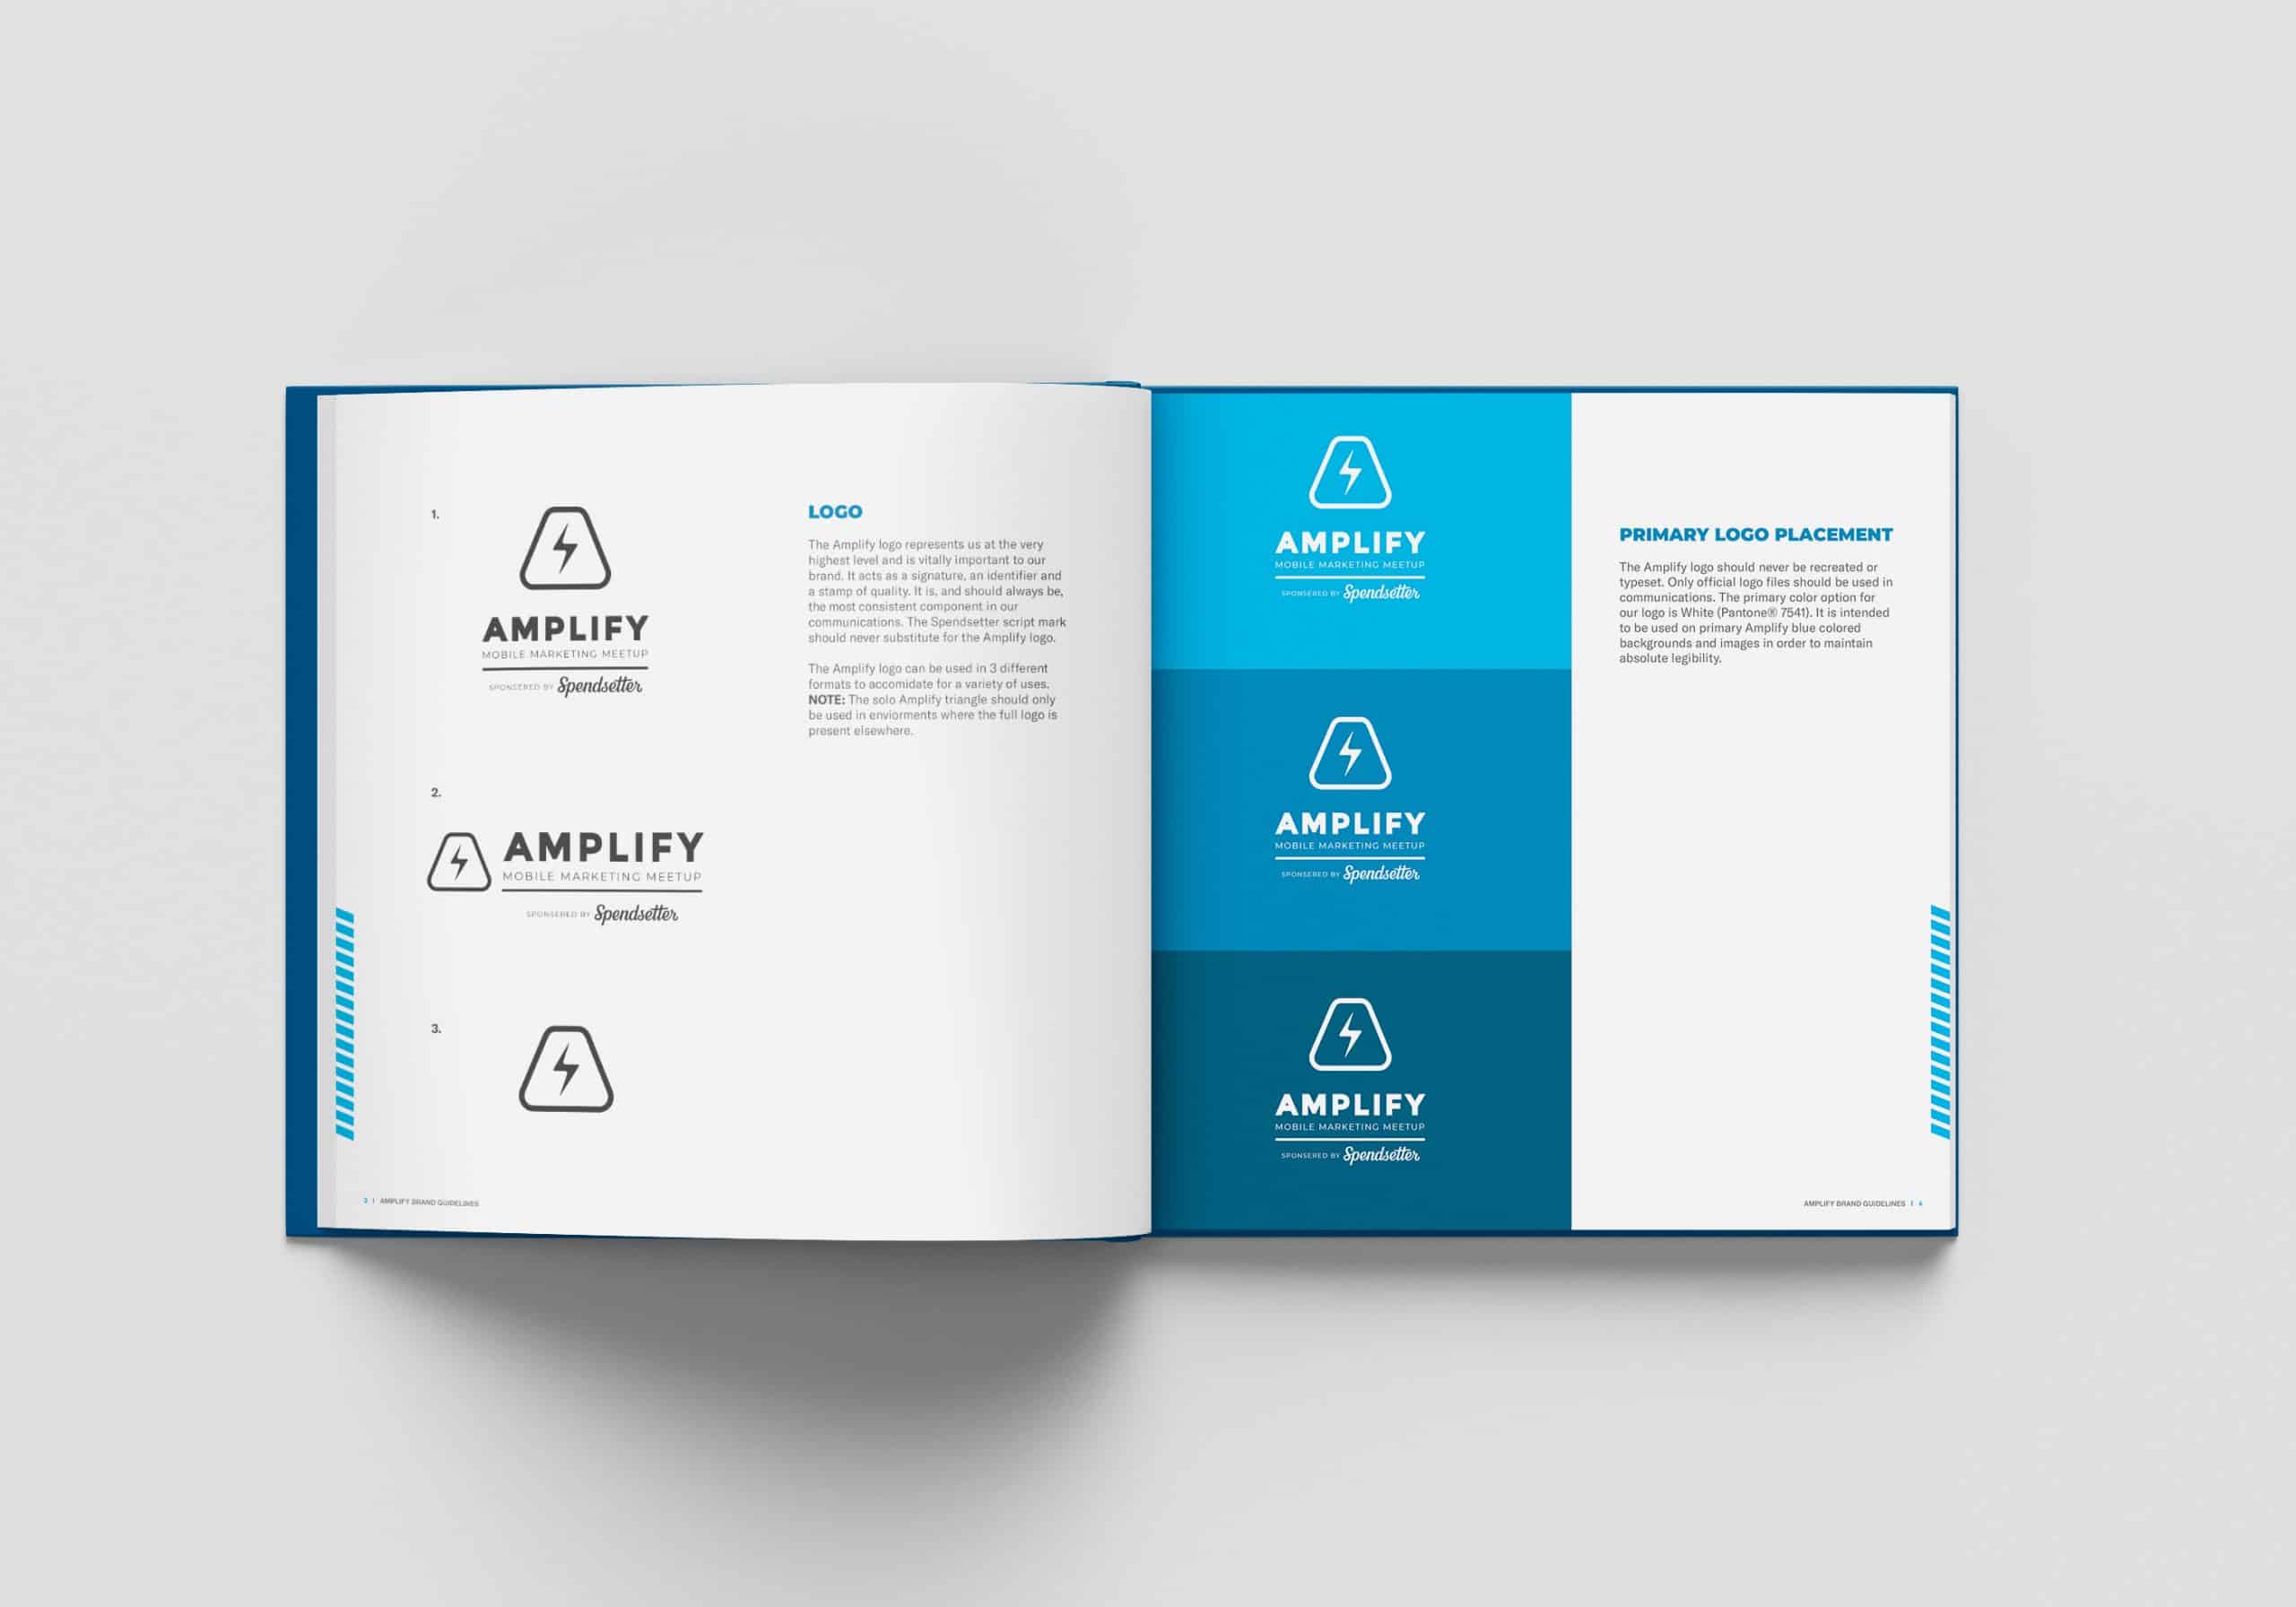 Amplify Brand Guidelines